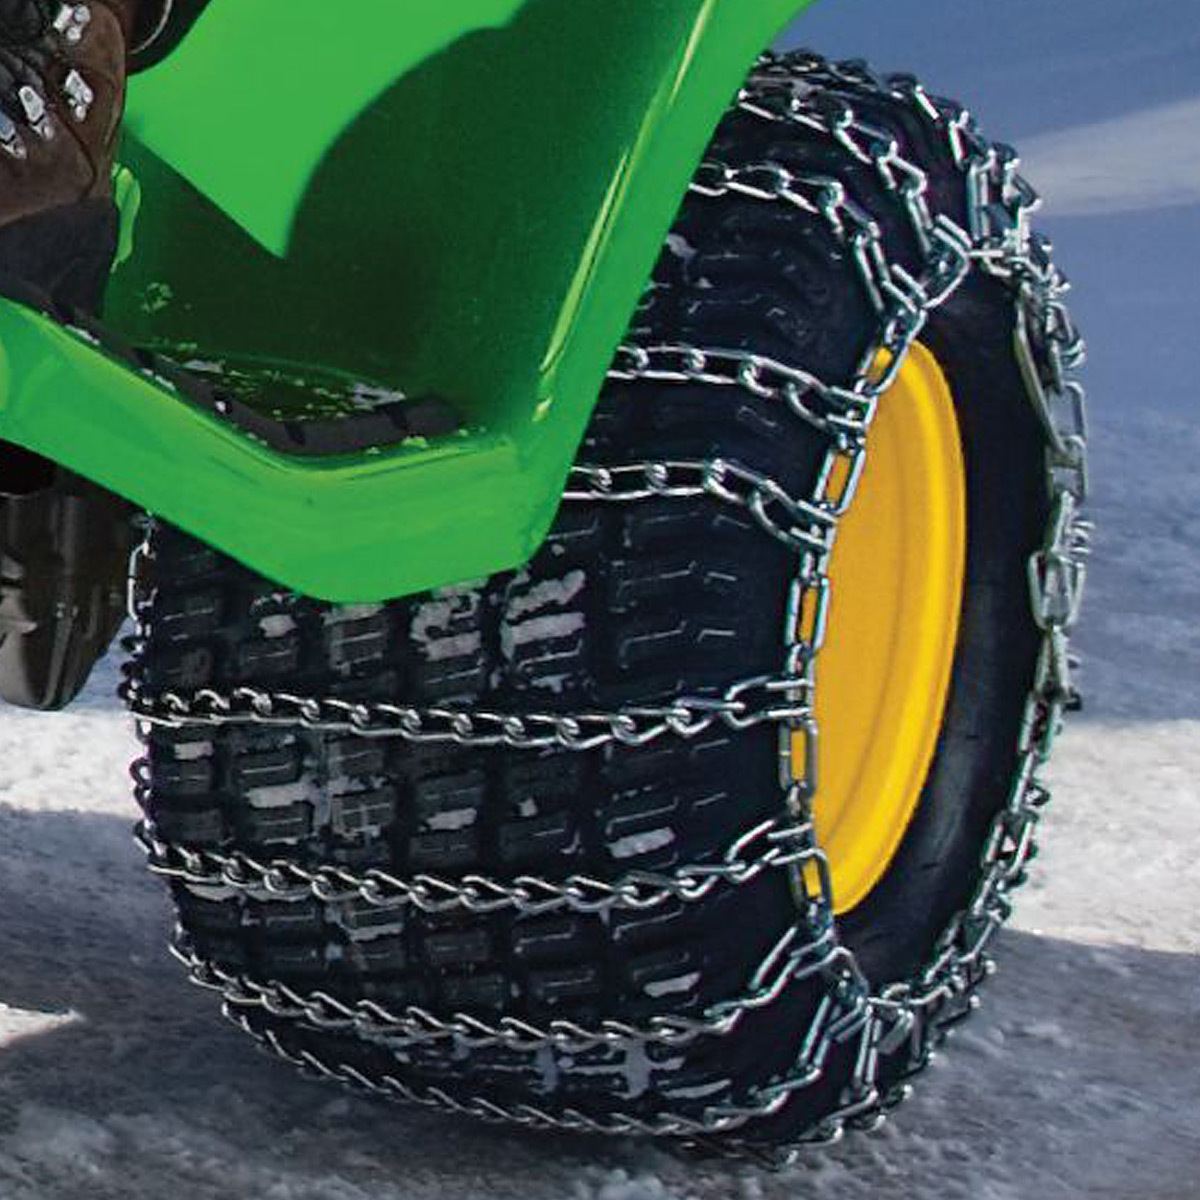 2 Link TIRE CHAINS & TENSIONERS 20x10x8 for John Deere Lawn Mower Tractor Rider 